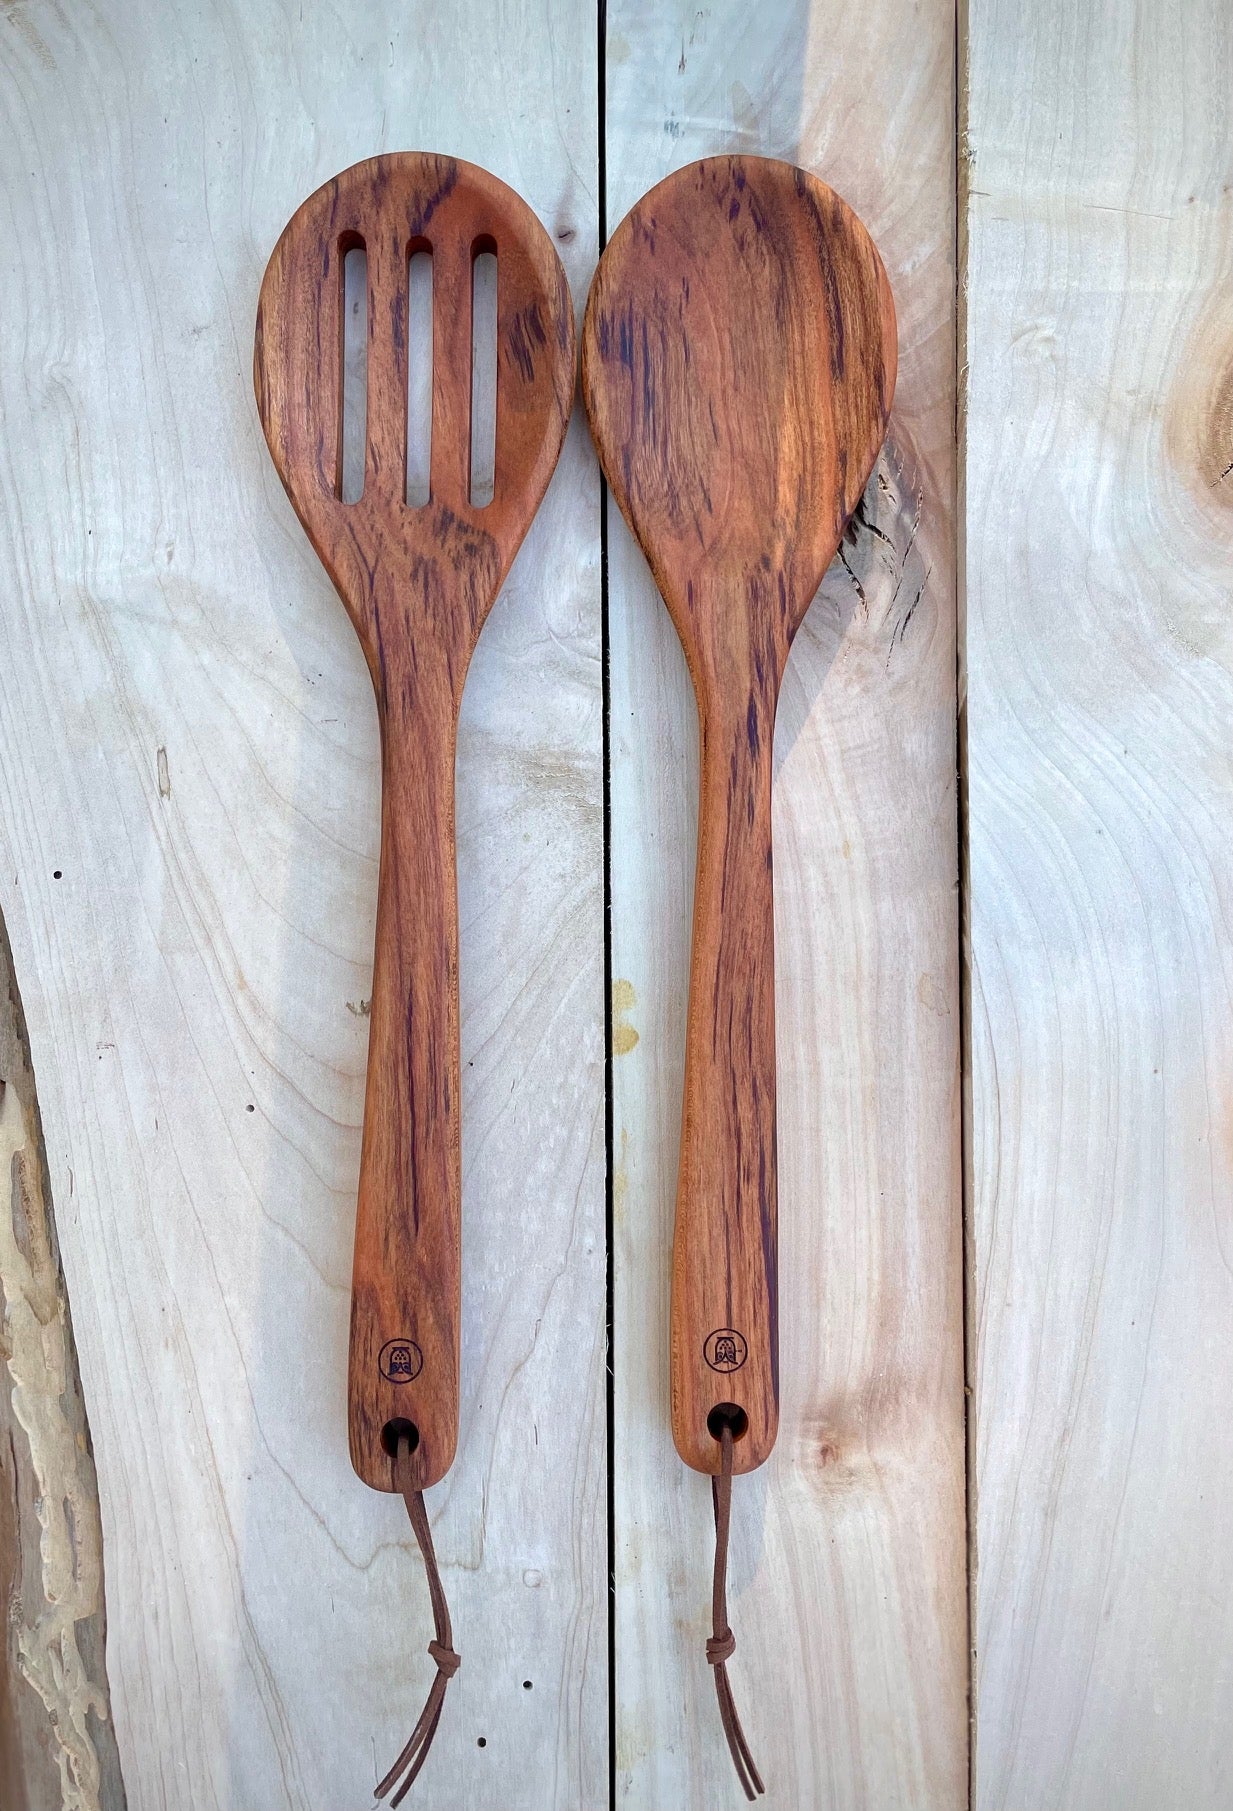 Handcrafted Wooden Spoons-kitchen > Home & Garden > Kitchen & Dining > Kitchen Tools & Utensils > Measuring Cups & Spoons-Quinn's Mercantile